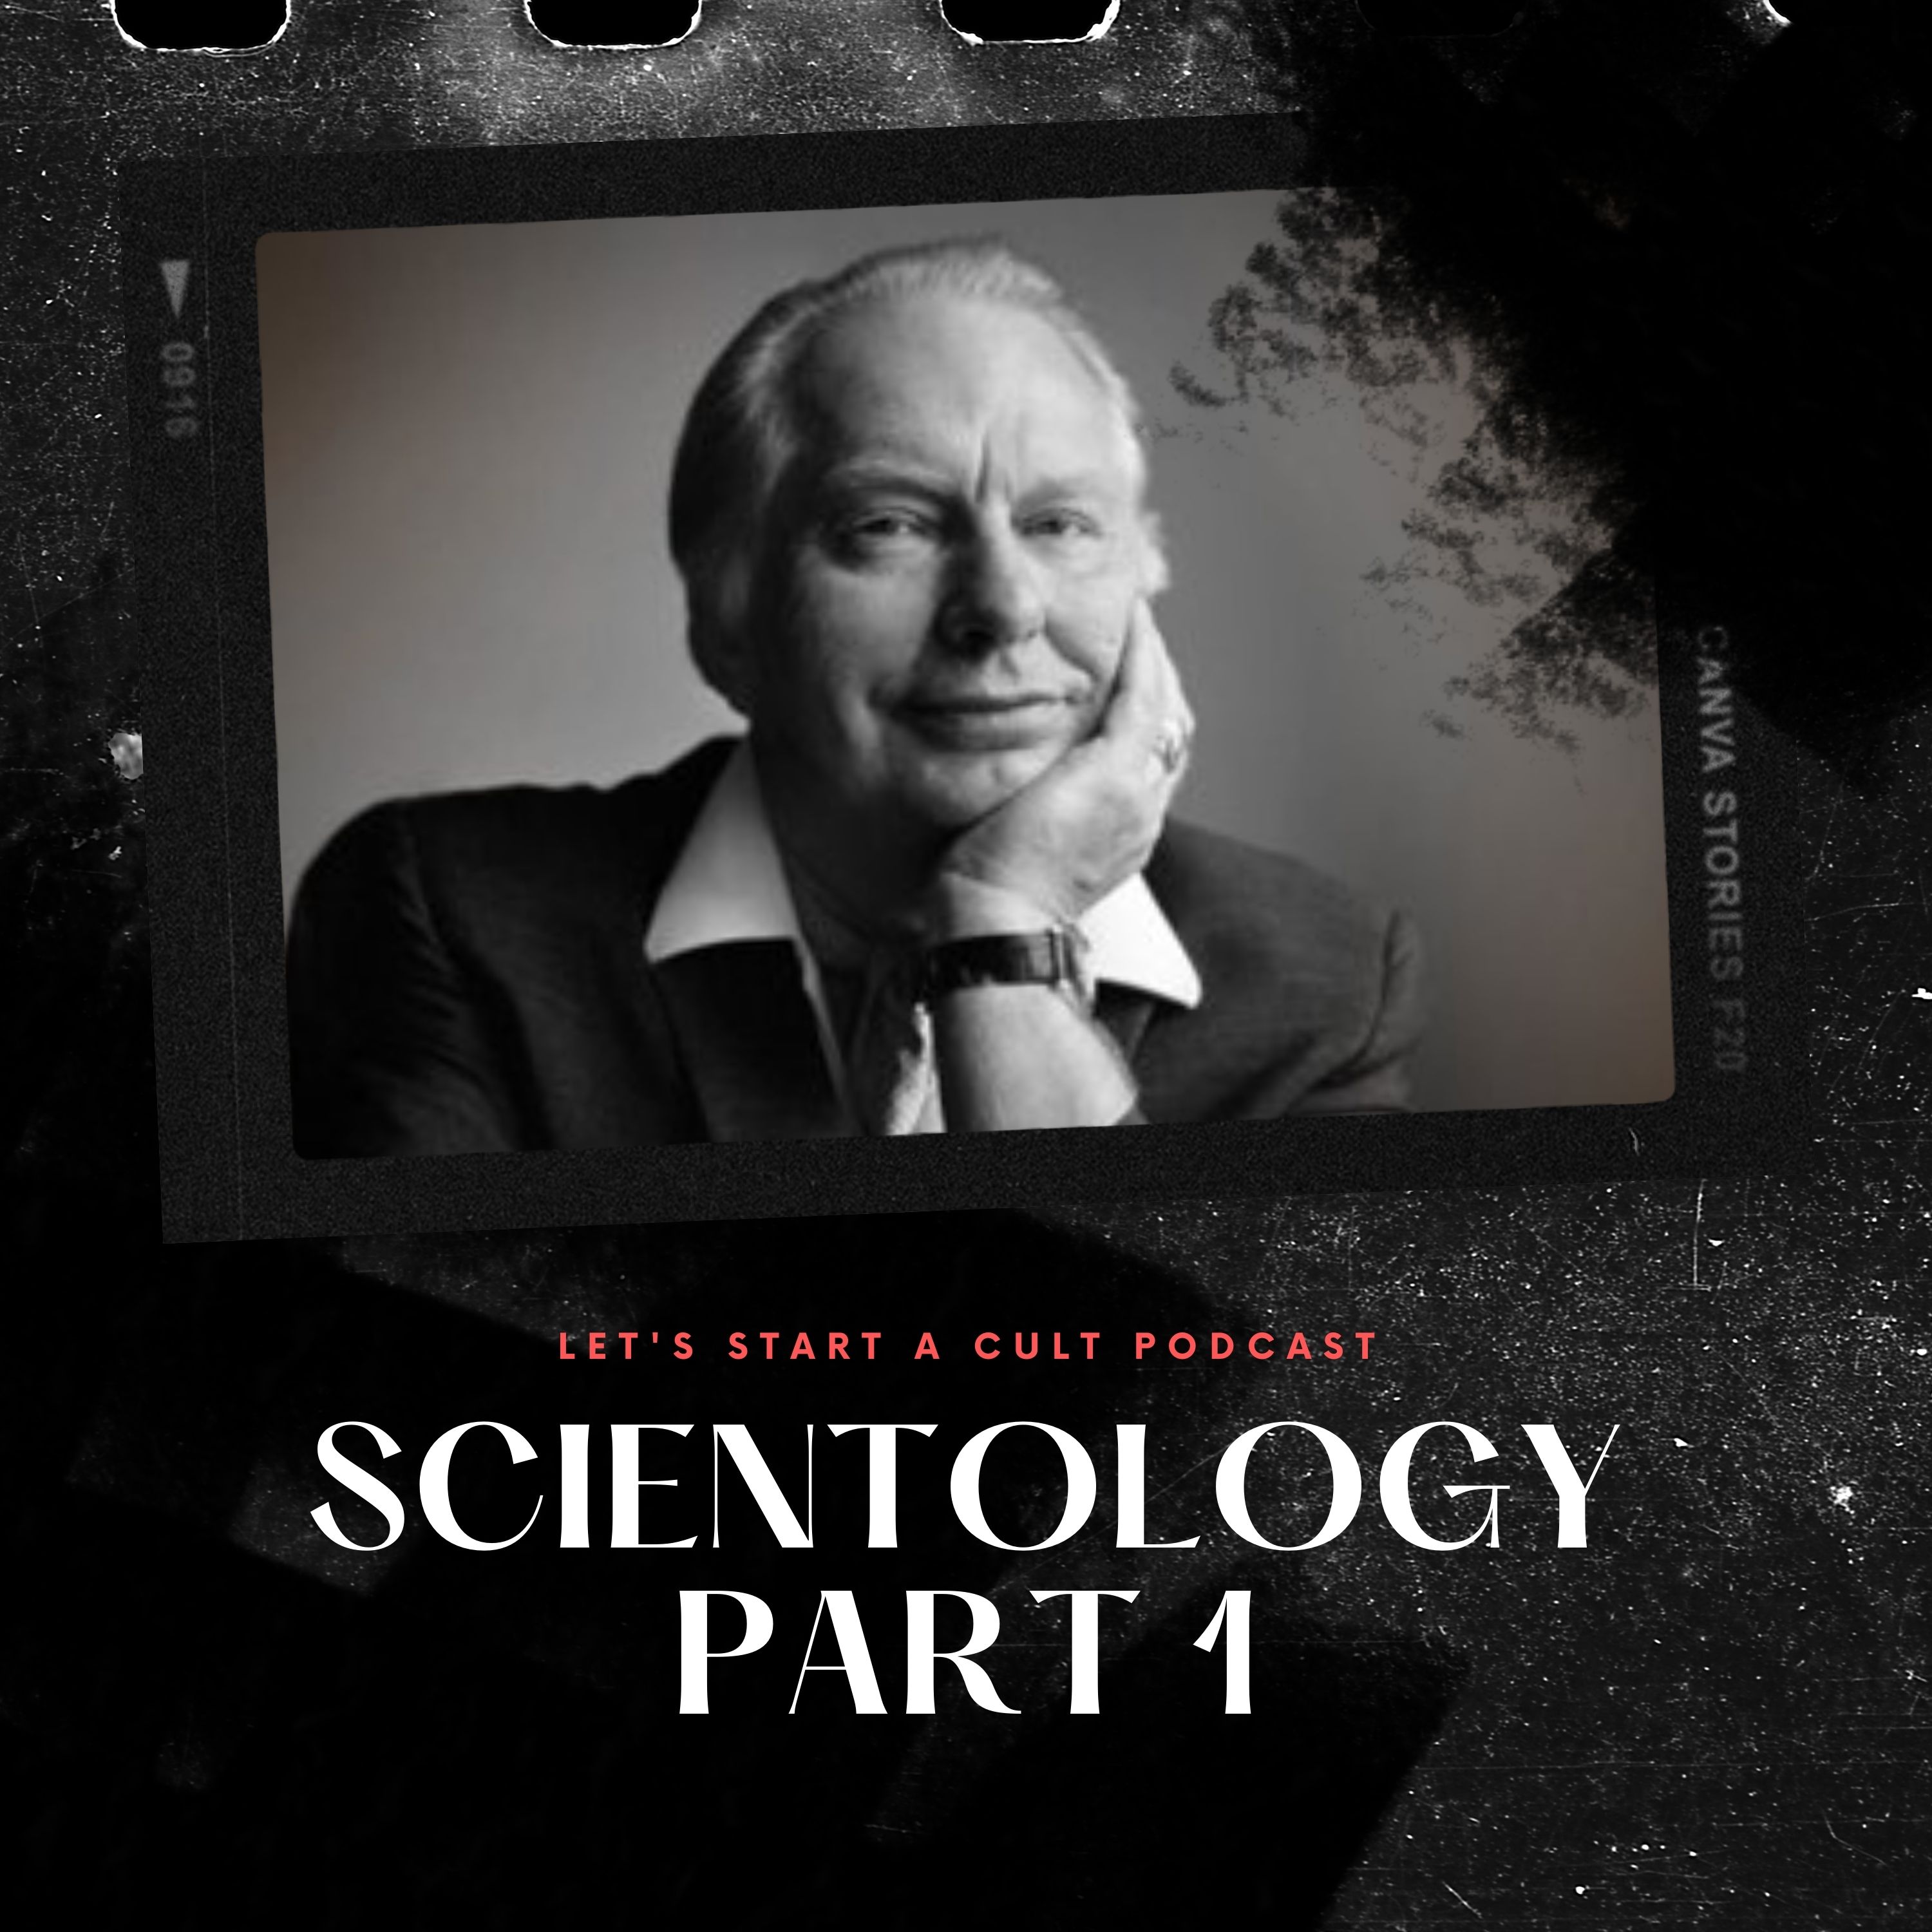 The Church of Scientology Part 1: The Story of L. Ron Hubbard Image